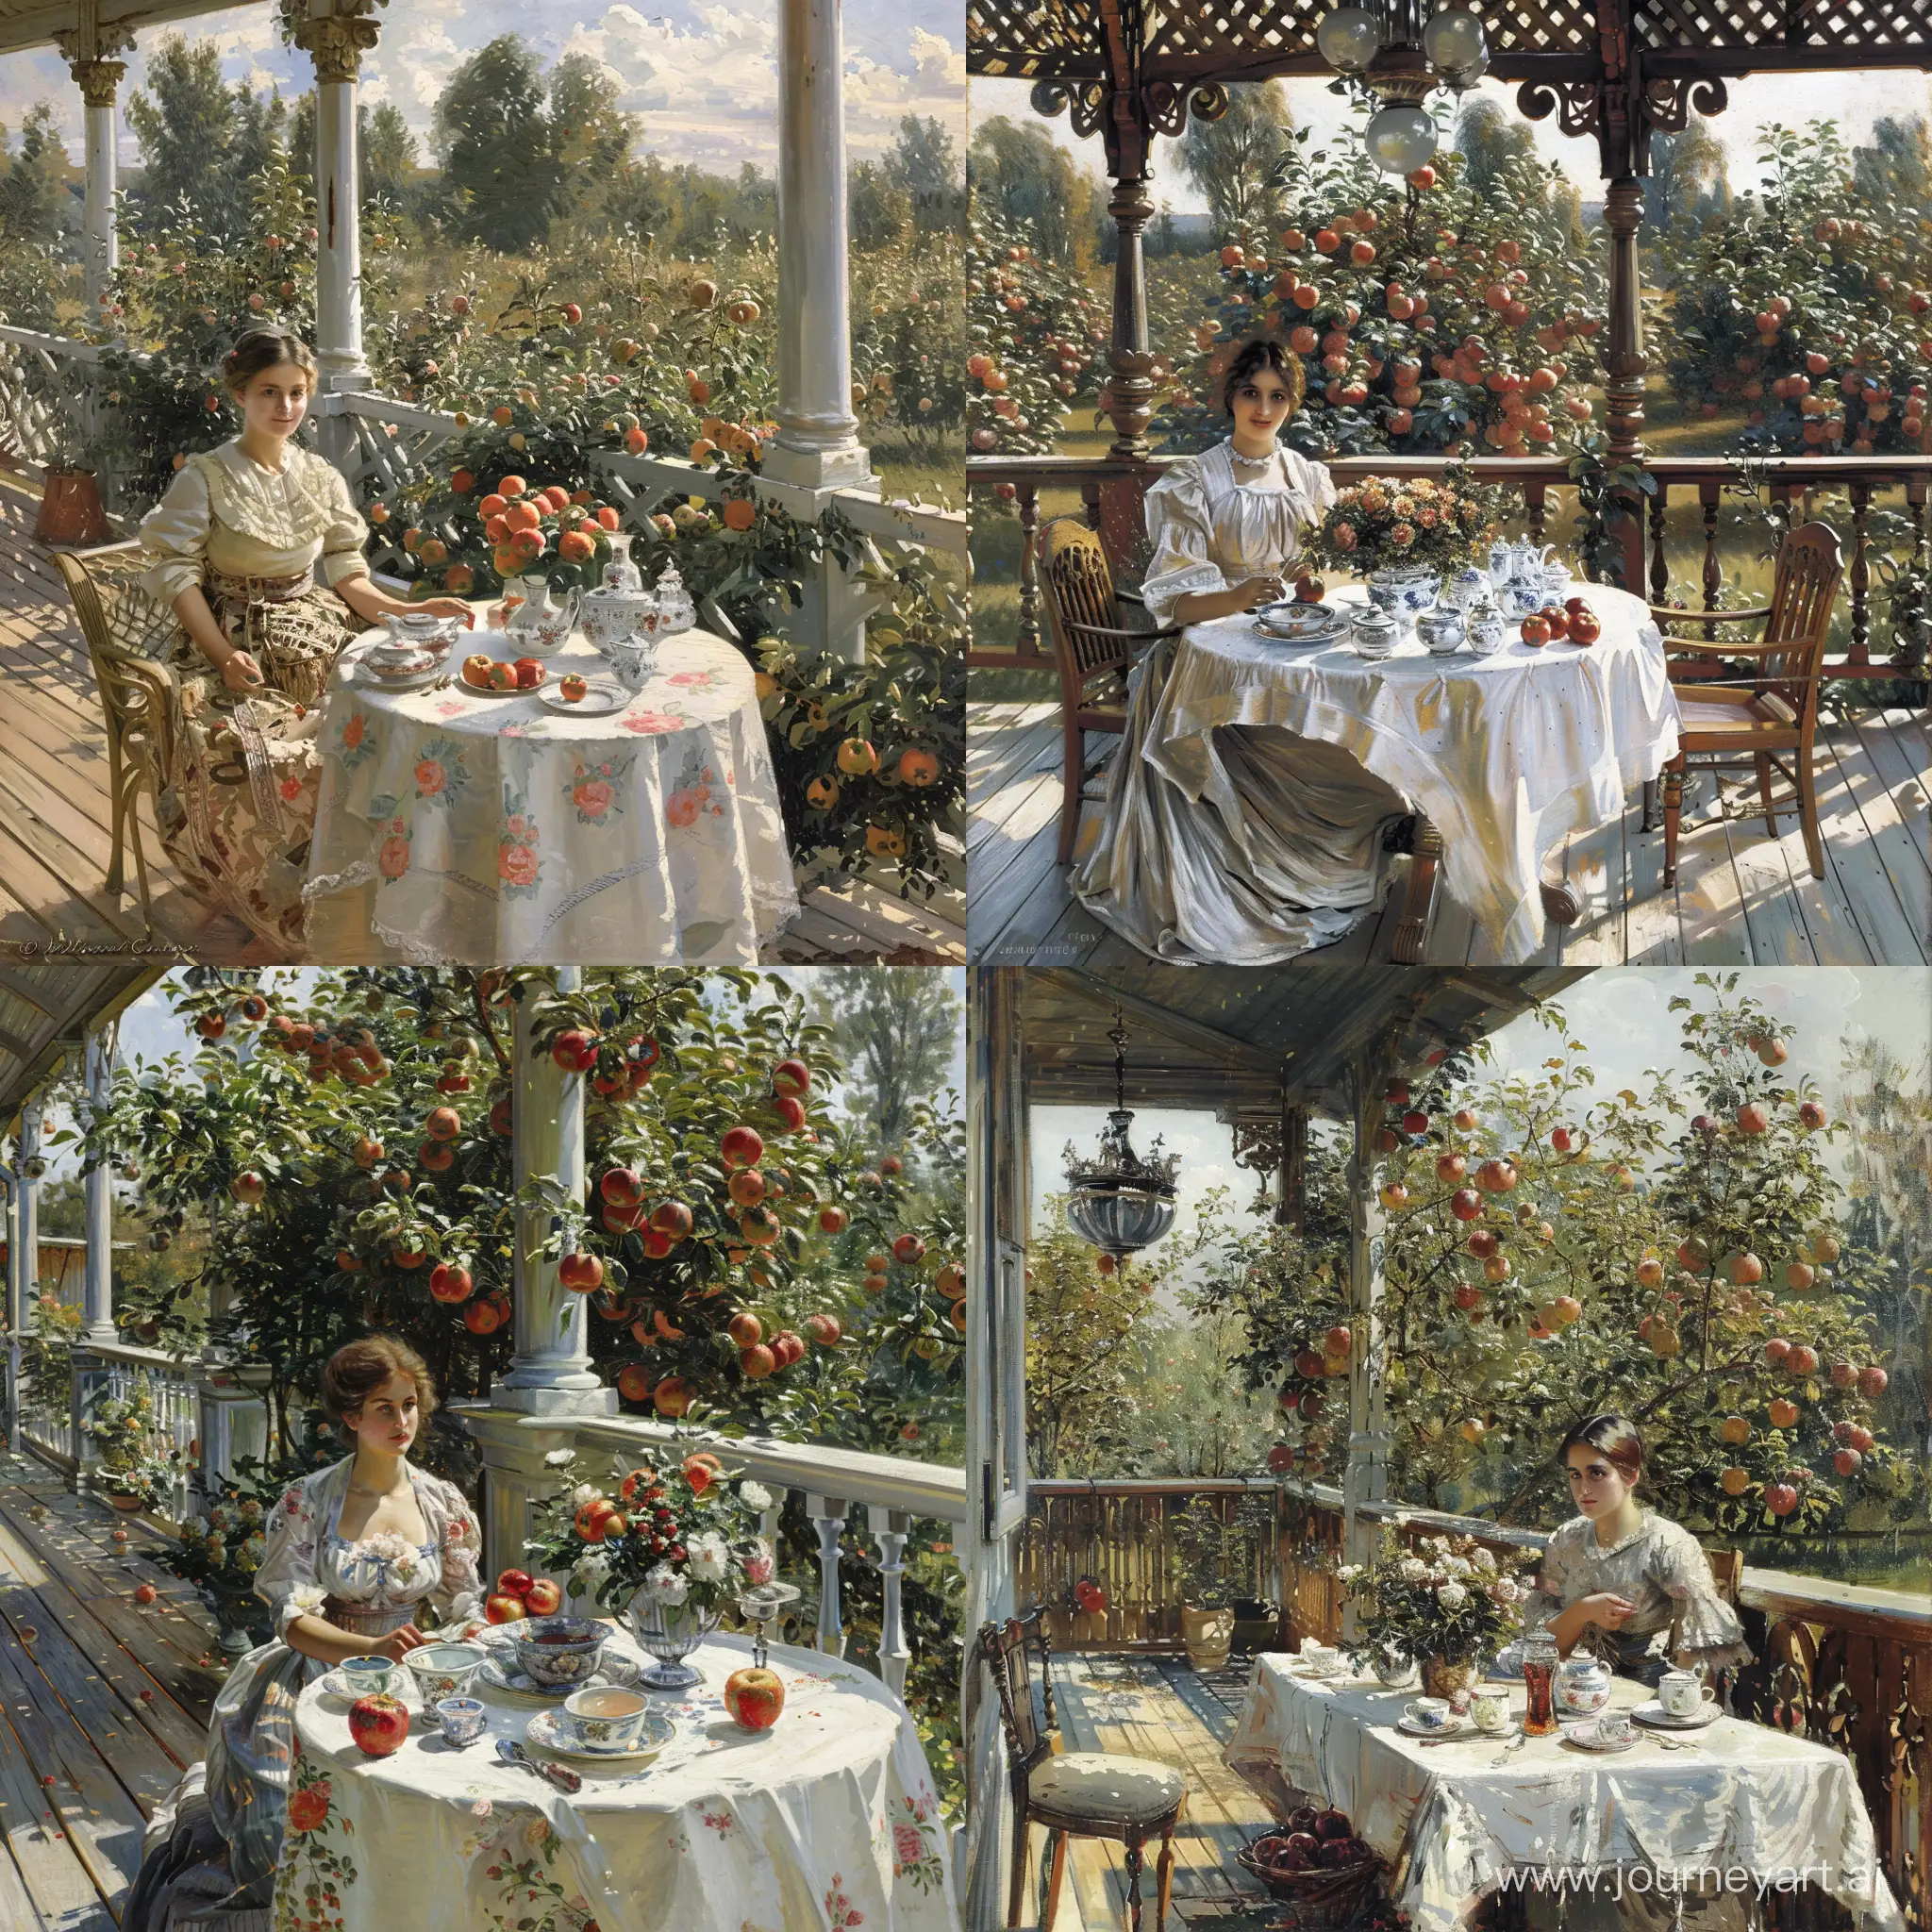 Impressionism. Scene of the XIX century in the Russian Empire. on the veranda of the estate at the table sits a woman in a simple dress., On the table white tablecloth, porcelain dishes, flowers. Around - an apple orchard.